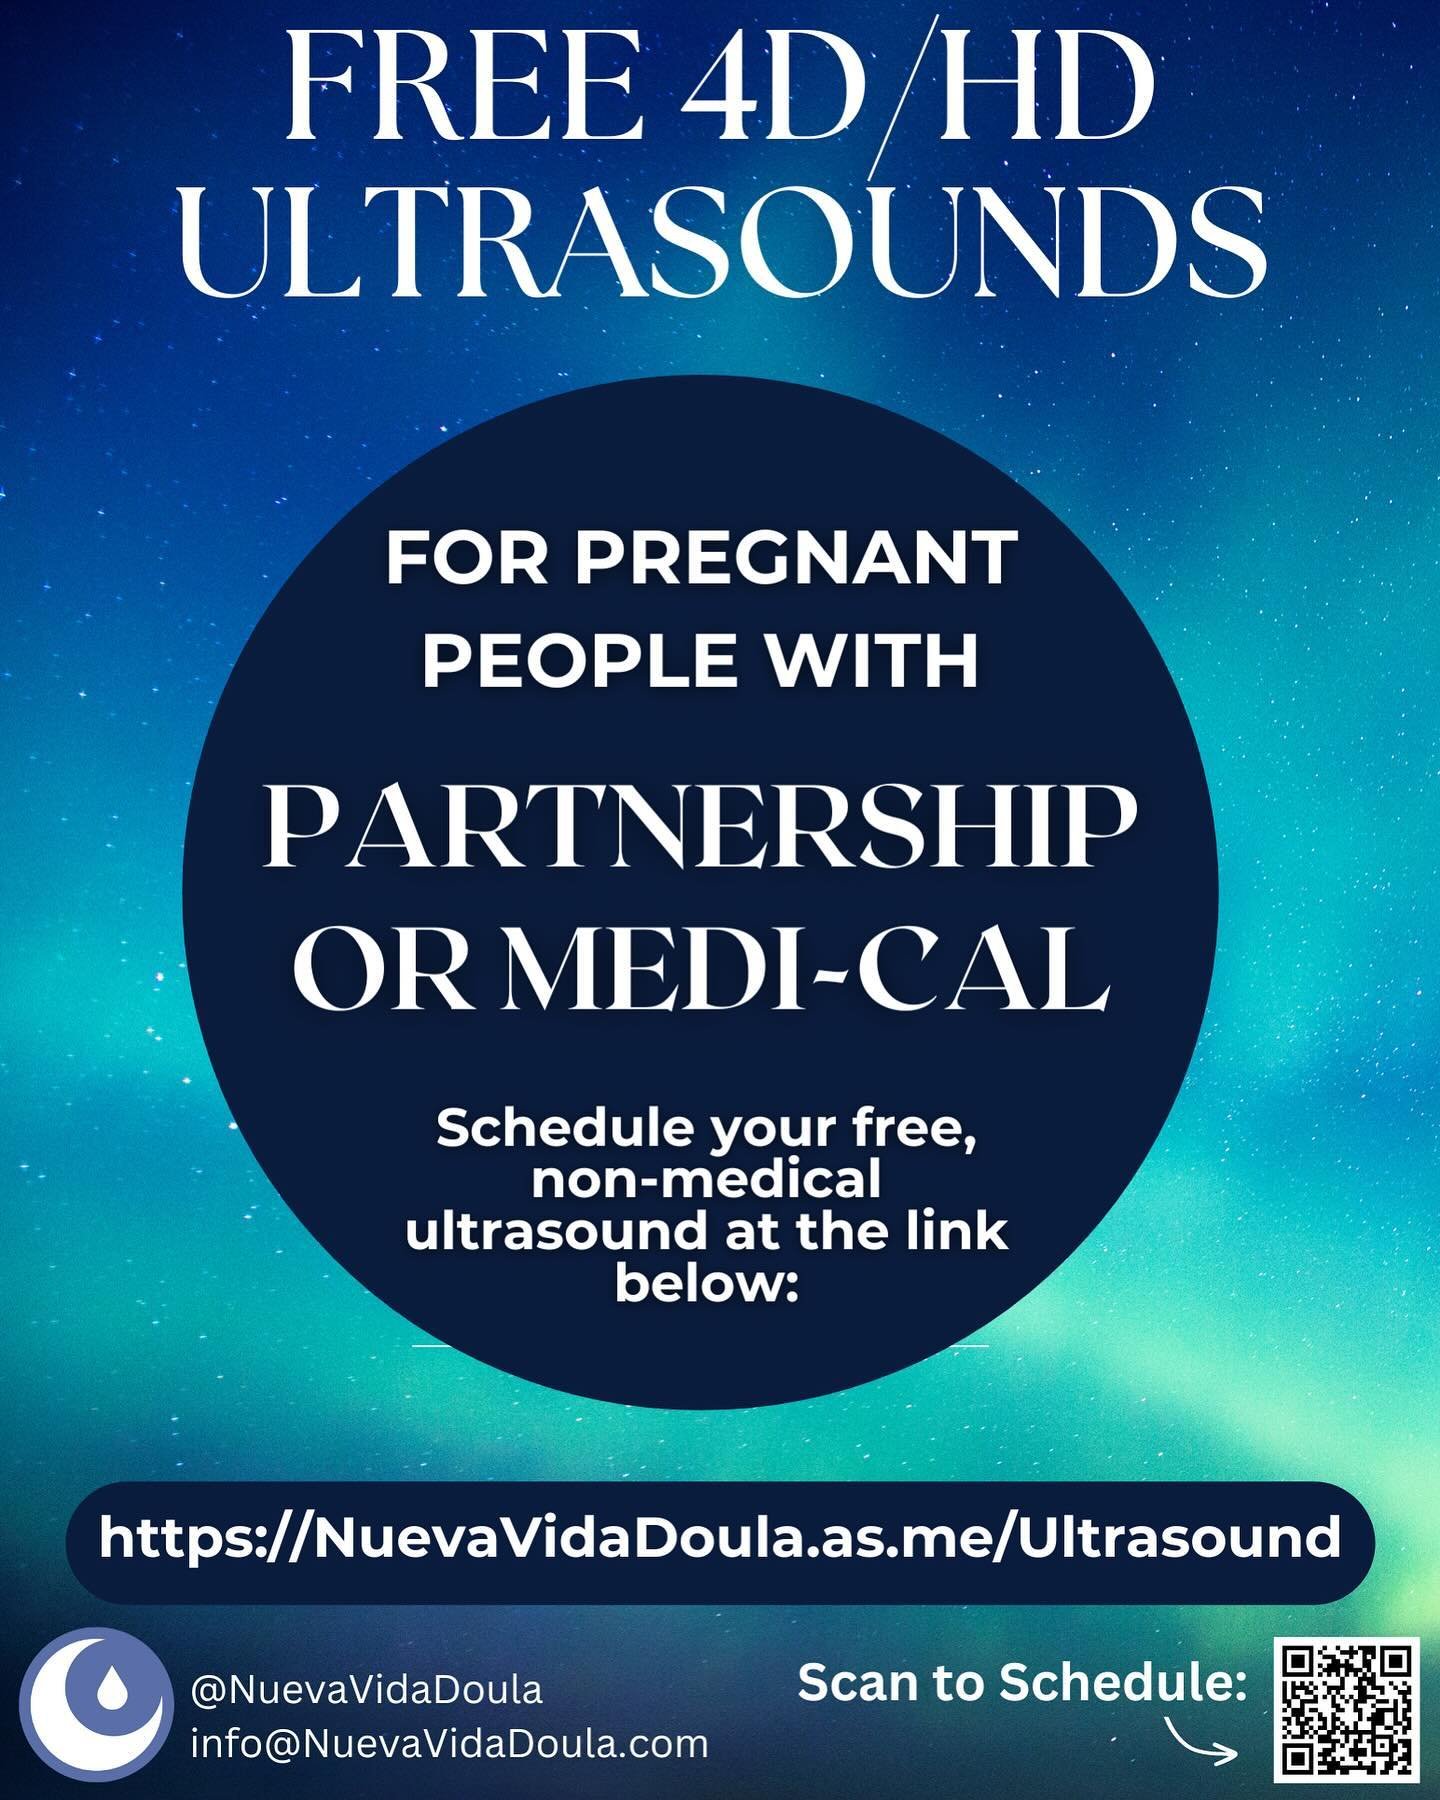 We are proud to offer FREE non-medical, elective ultrasounds for pregnant people with medi-cal or partnership health coverage!
Schedule your appointment at: https://NuevaVidaDoula.as.me/Ultrasound 
(Scheduling link in bio)
Looking forward to meeting 